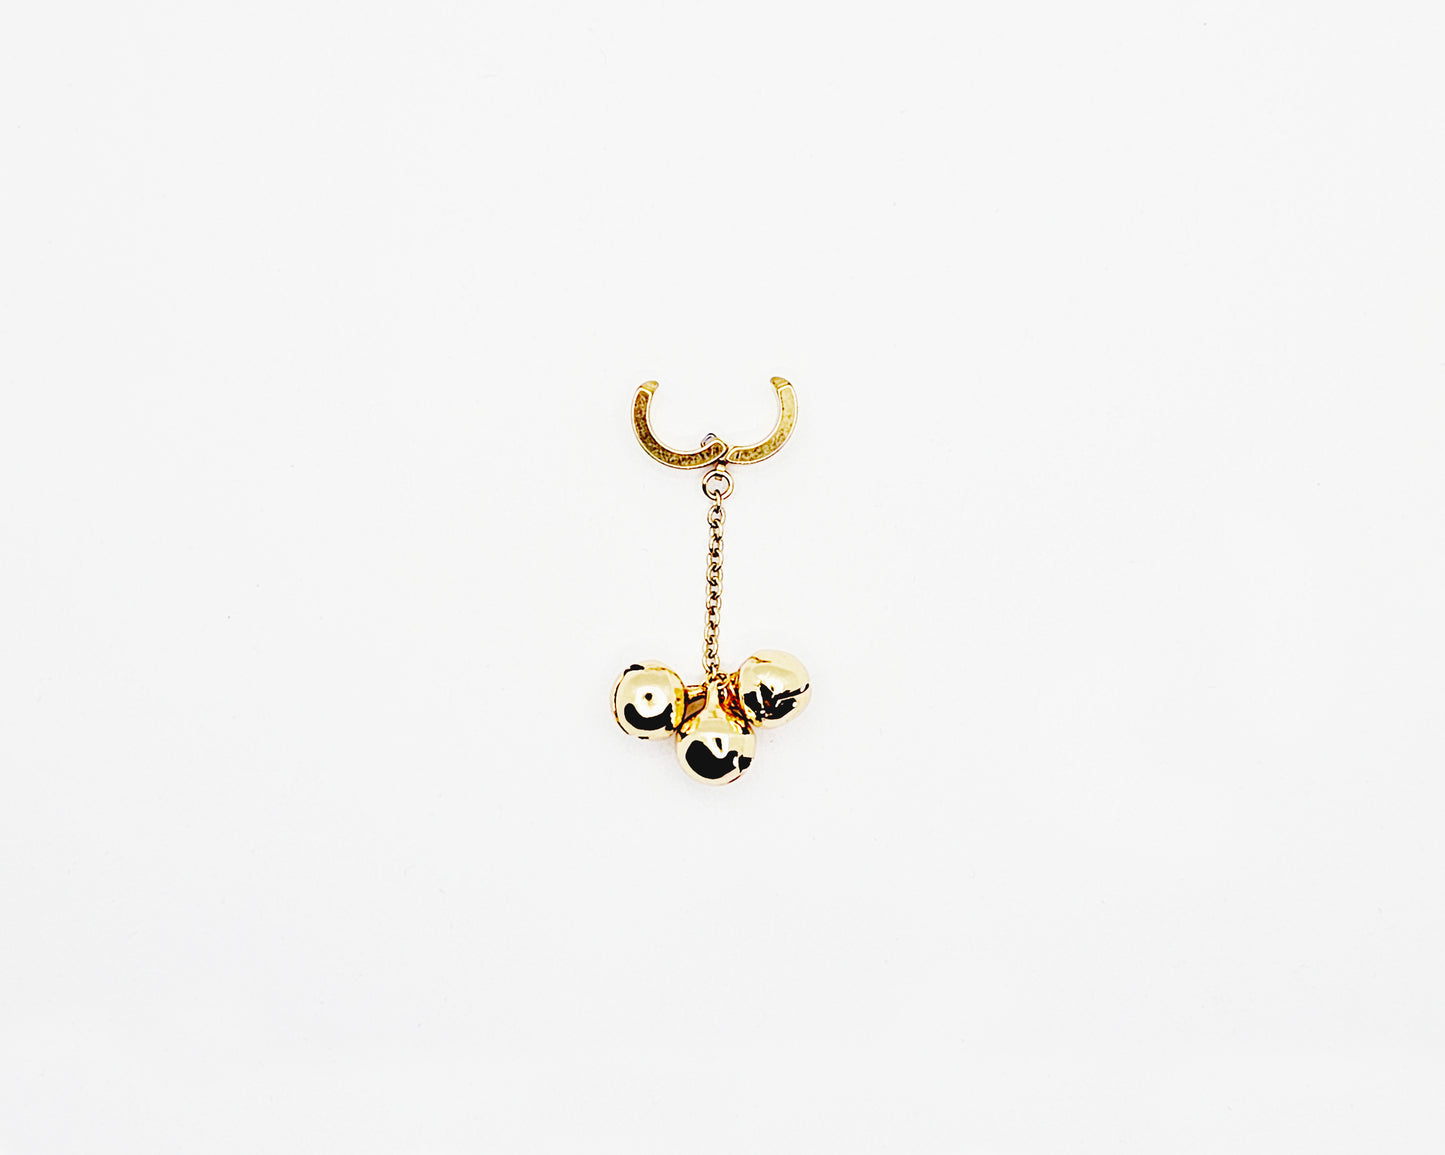 Genital Jewelry Clip with Bells, Stainless Steel. In Gold or Silver. Non Piercing Clitoral Jewelry.